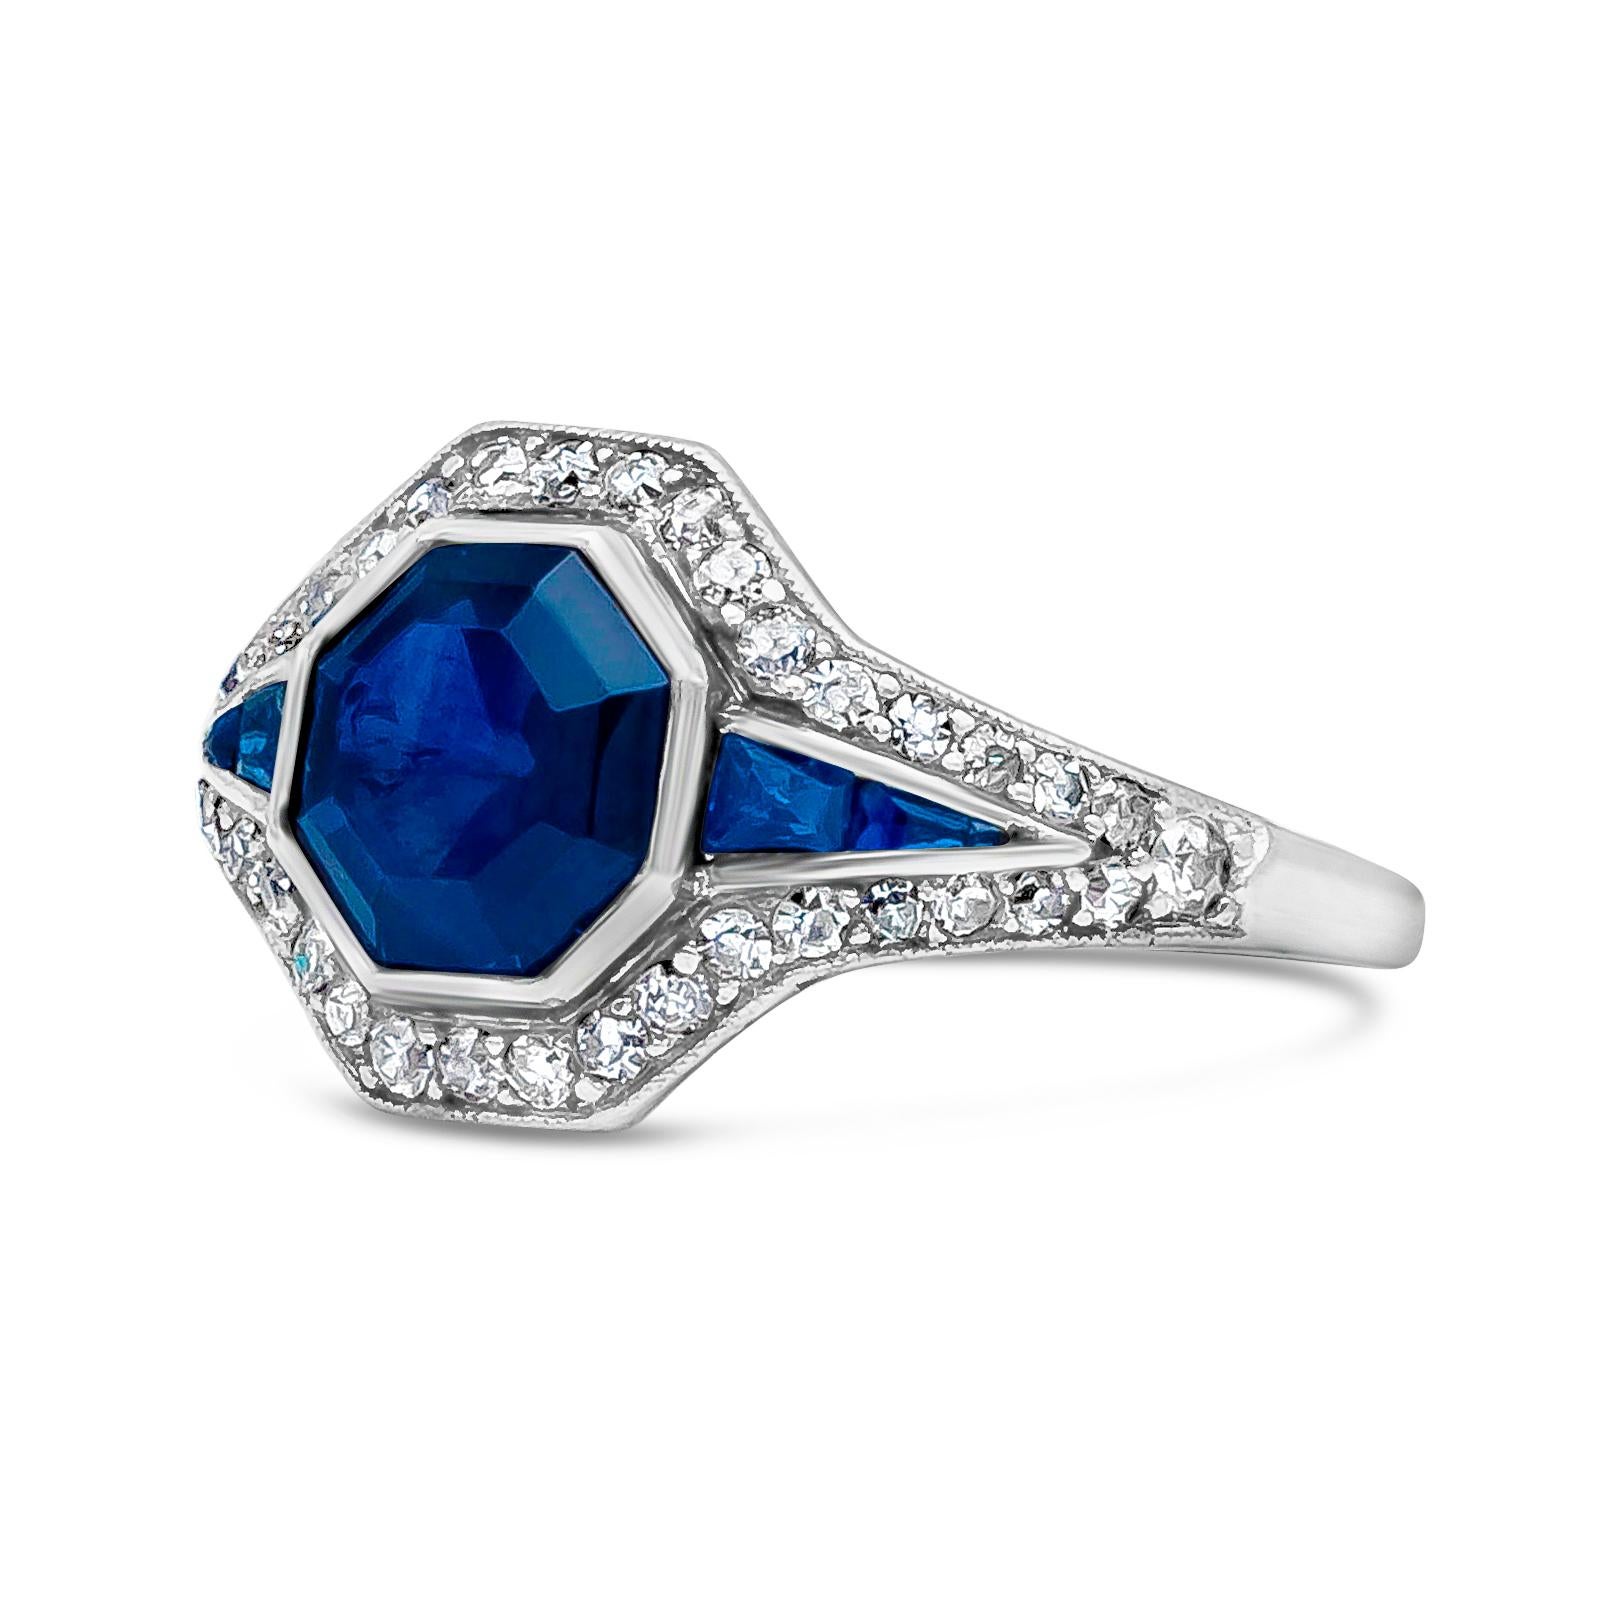 A stunning antique gemstone engagement ring features 1.53 carat asscher cut blue sapphire, flanked by tapered baguette shaped blue sapphires weighing 0.08 carats. Surrounded by antique old european cut diamonds weighing 0.30 carats, G Color and SI